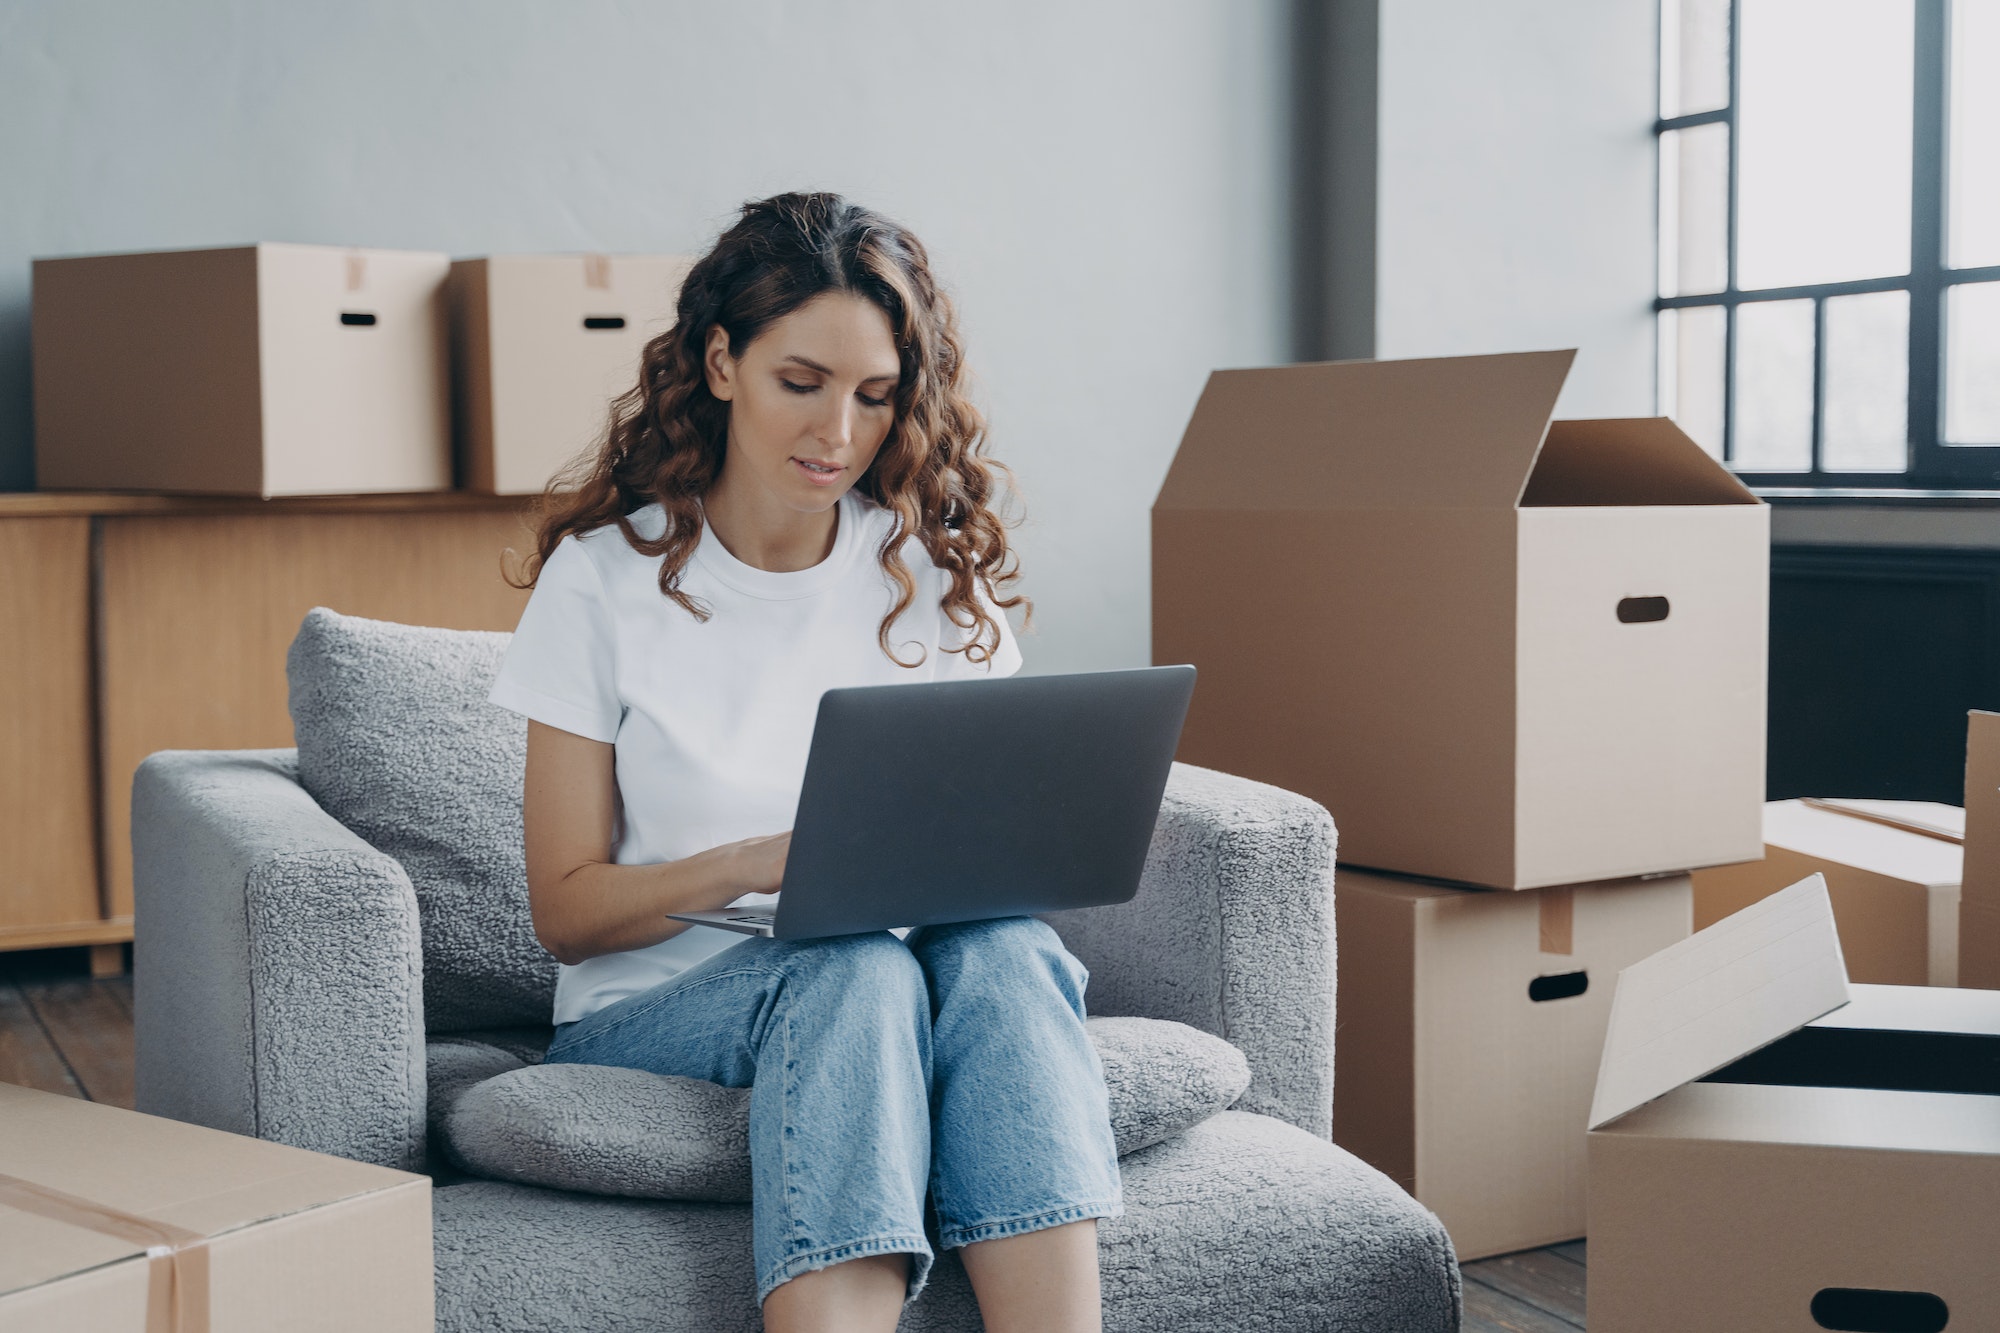 Girl shopping online for new house at laptop, sitting among card boxes. Relocation, ecommerce